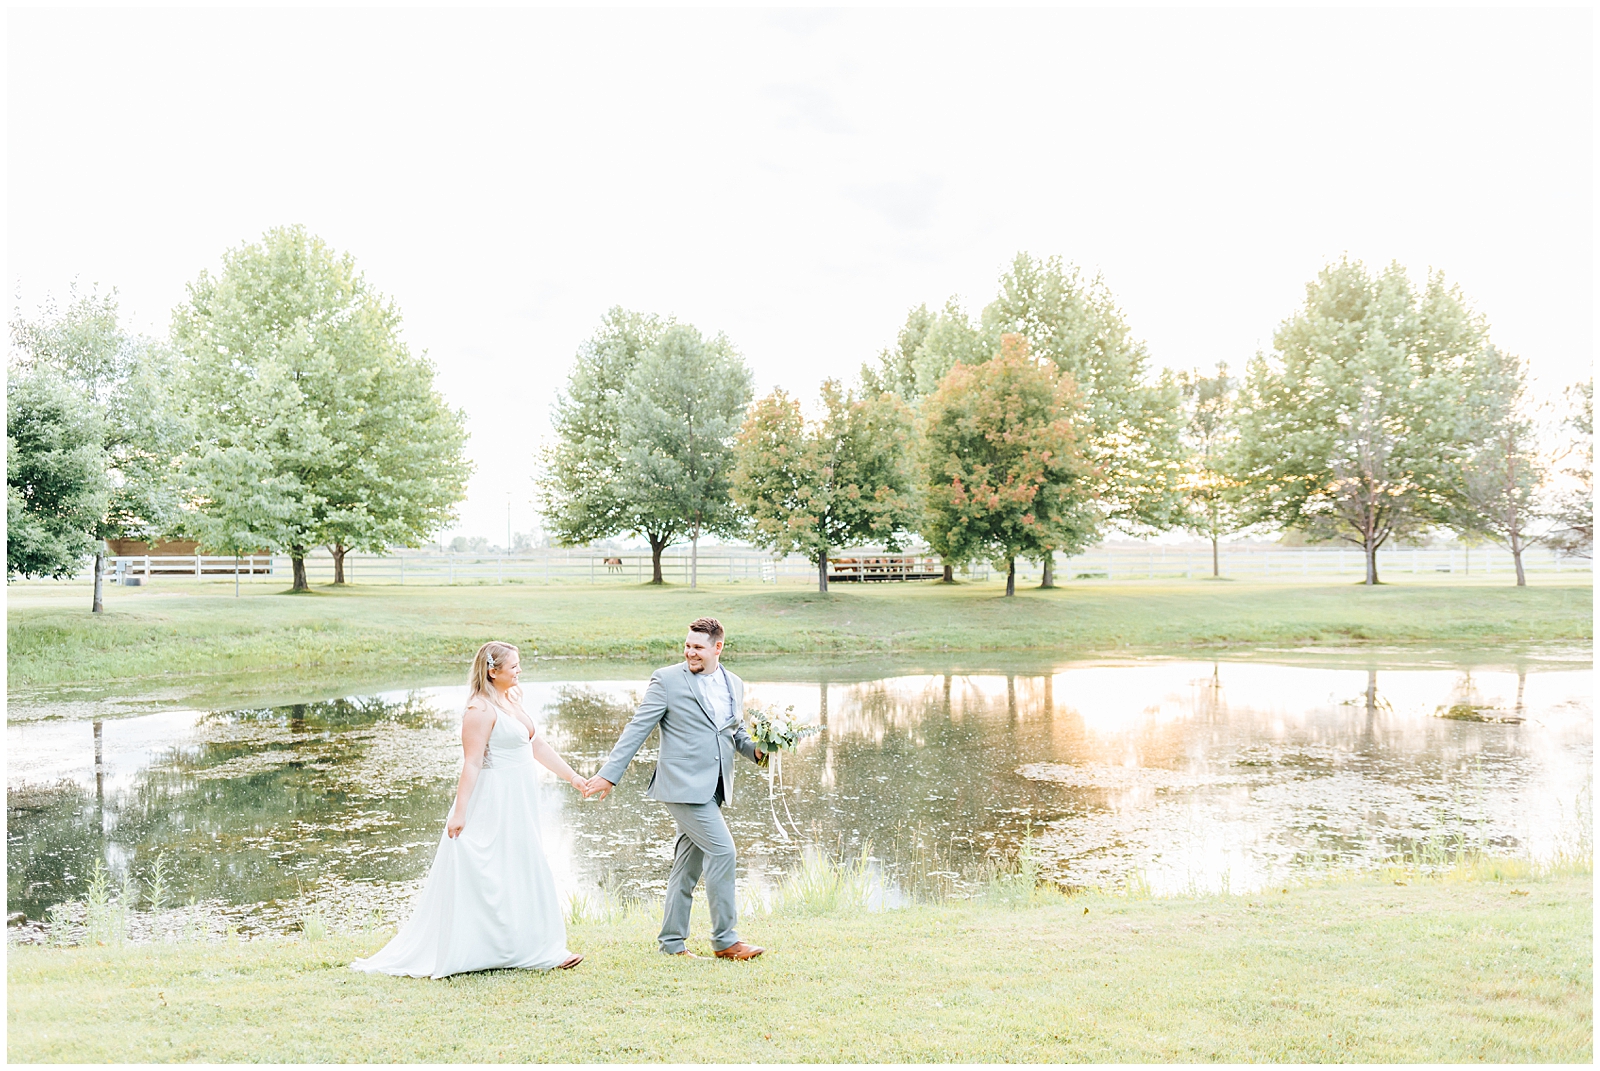 Sunset Golden Hour Husband and Wife Portraits at White Willow Estate Wedding along the Boise River